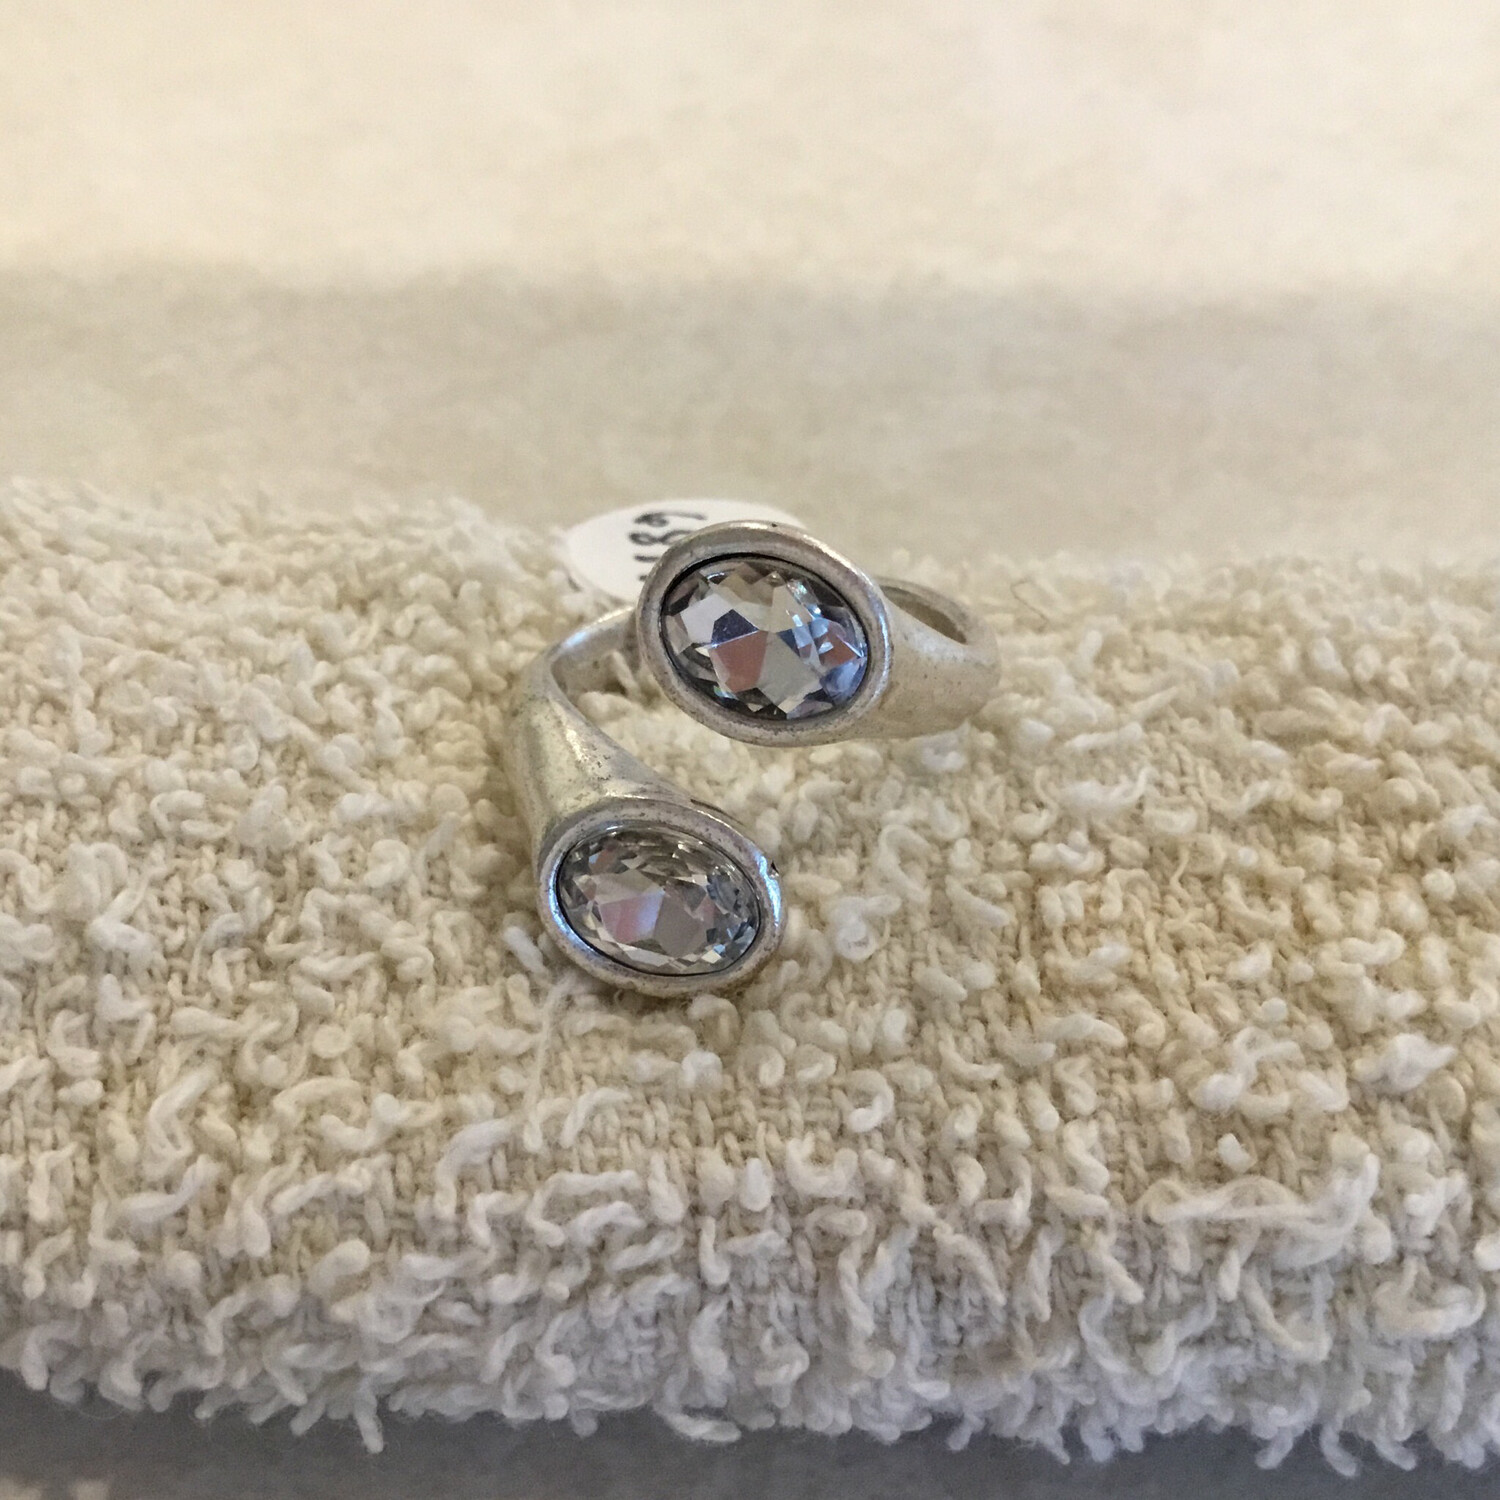 Handmade Pewter Crossover Adjustable Ring With Clear Crystal